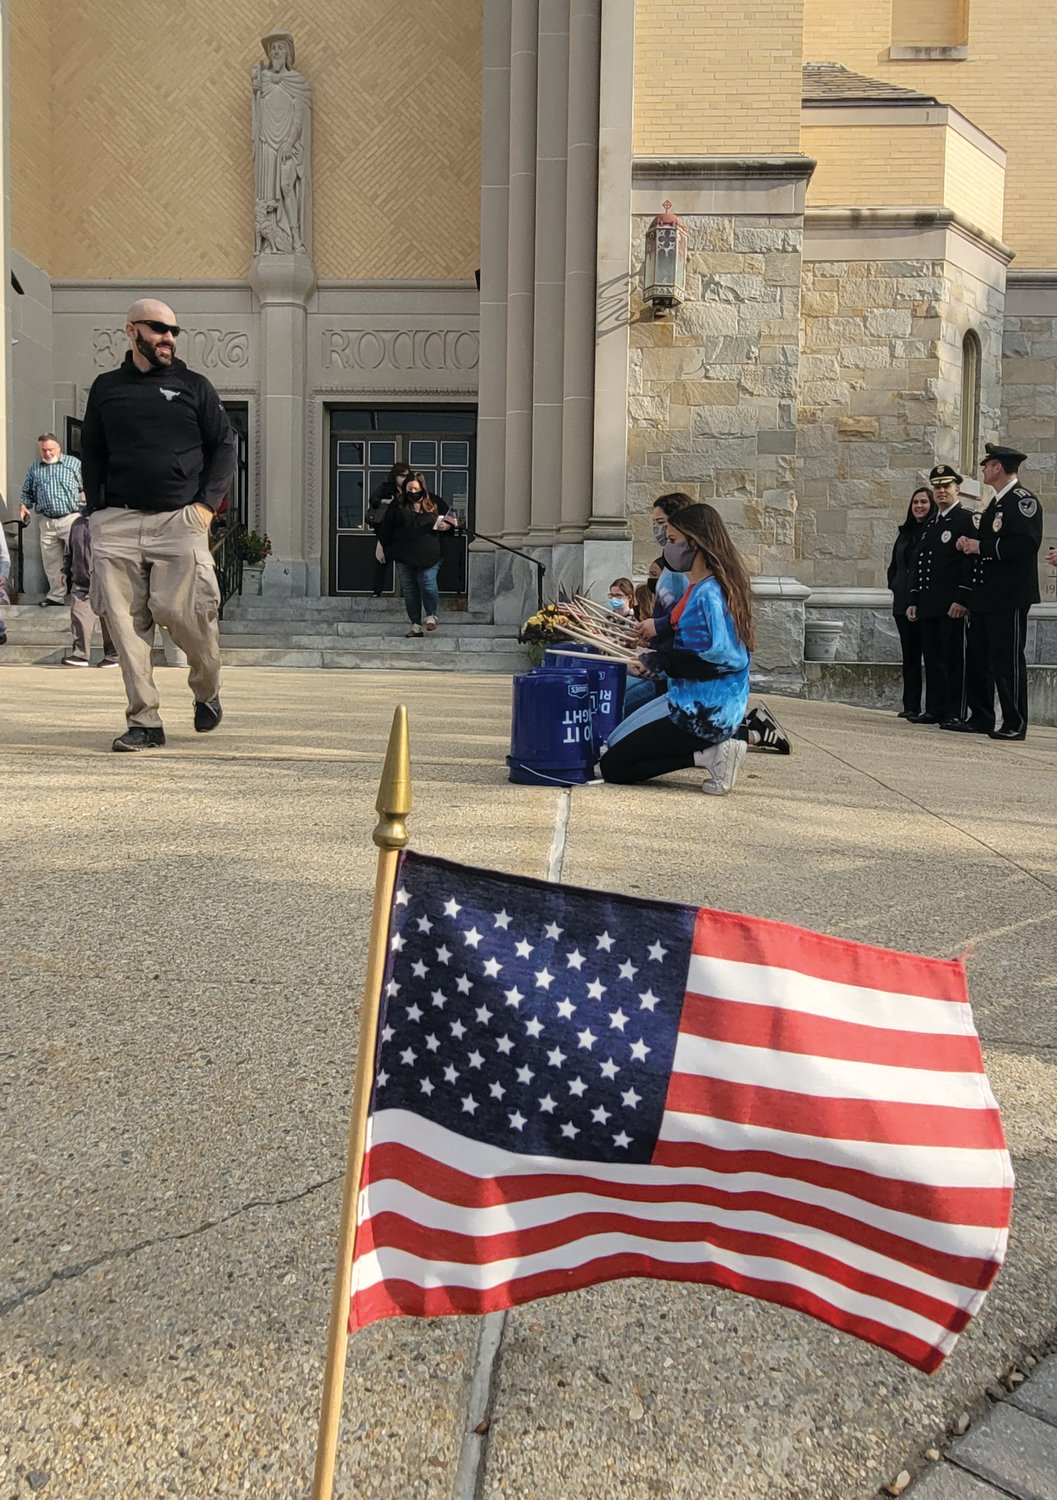 After the prayer service for veterans, outside, seventh grade St. Rocco students drummed to the song The Stars & Stripes Forever. 